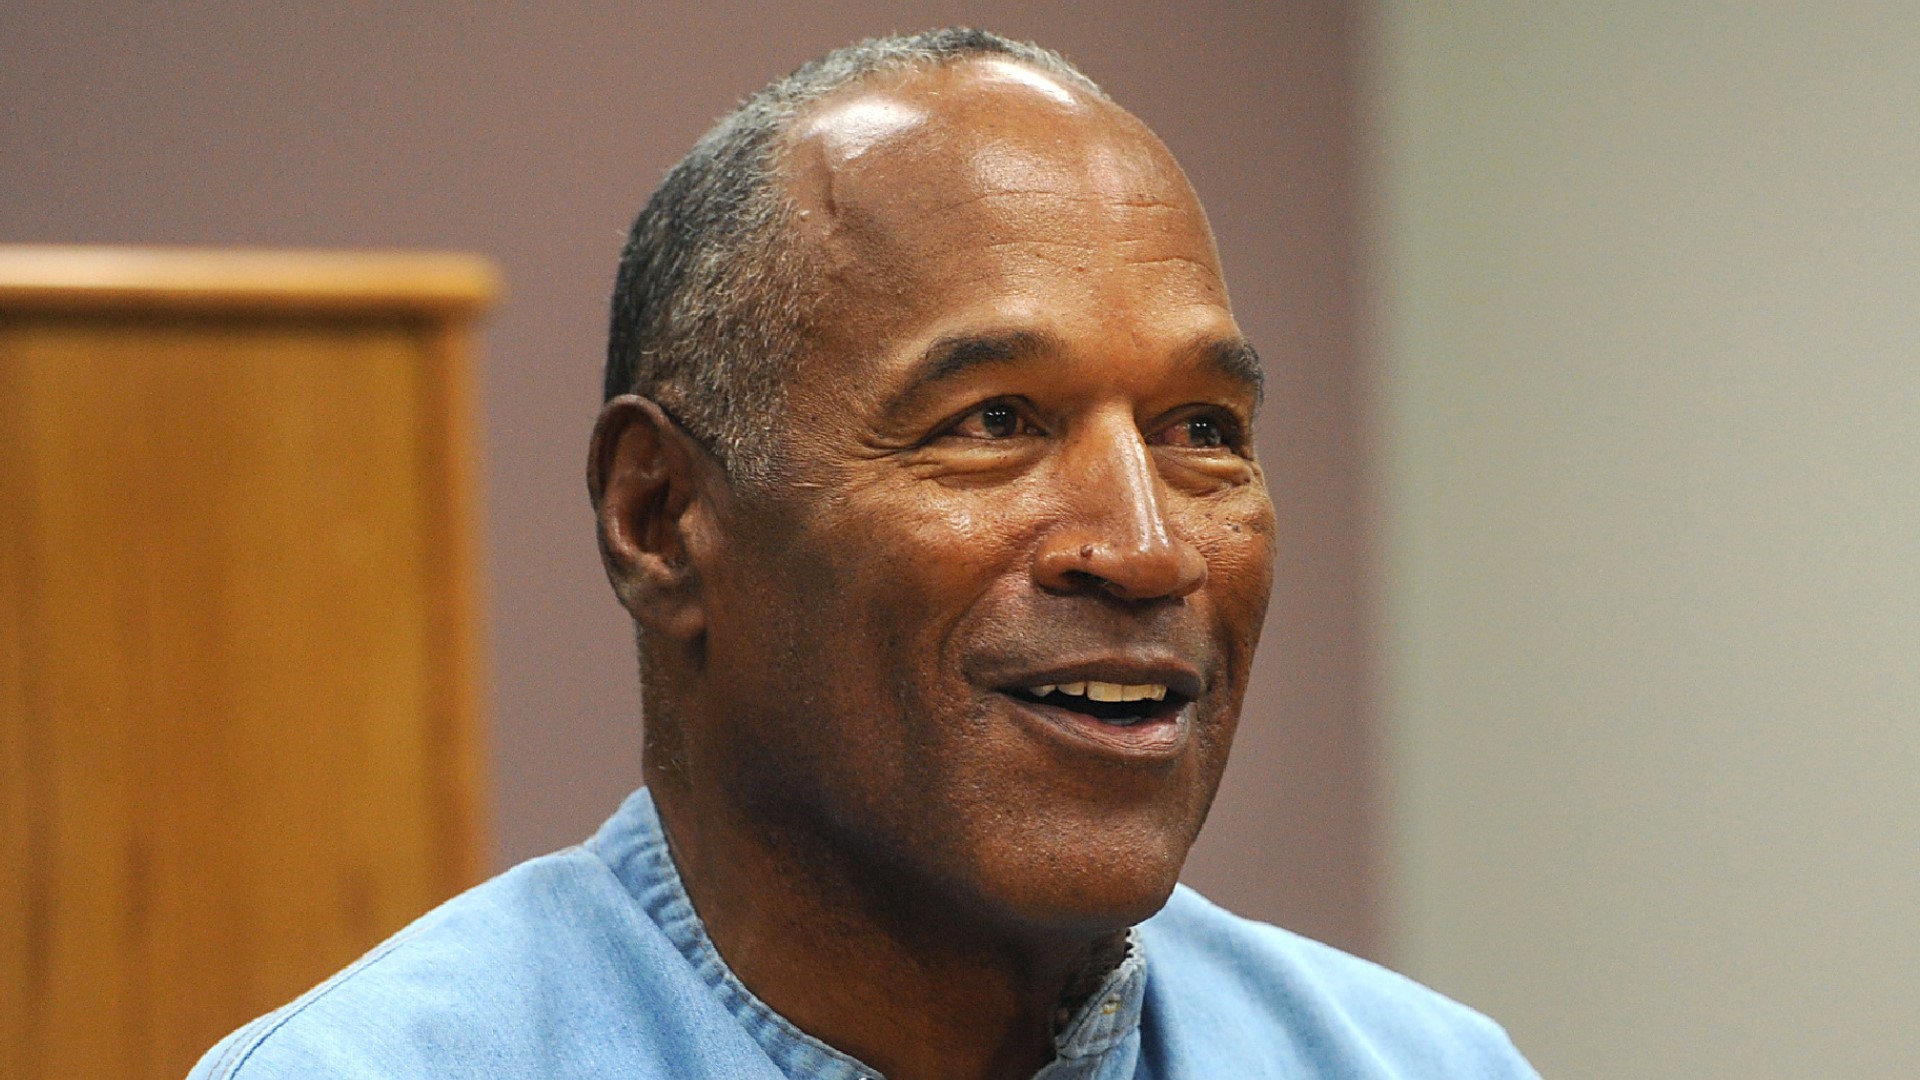 O.J. Simpson was a former NFL star acquitted in the double murder of his ex-wife and her friend. He was 76.